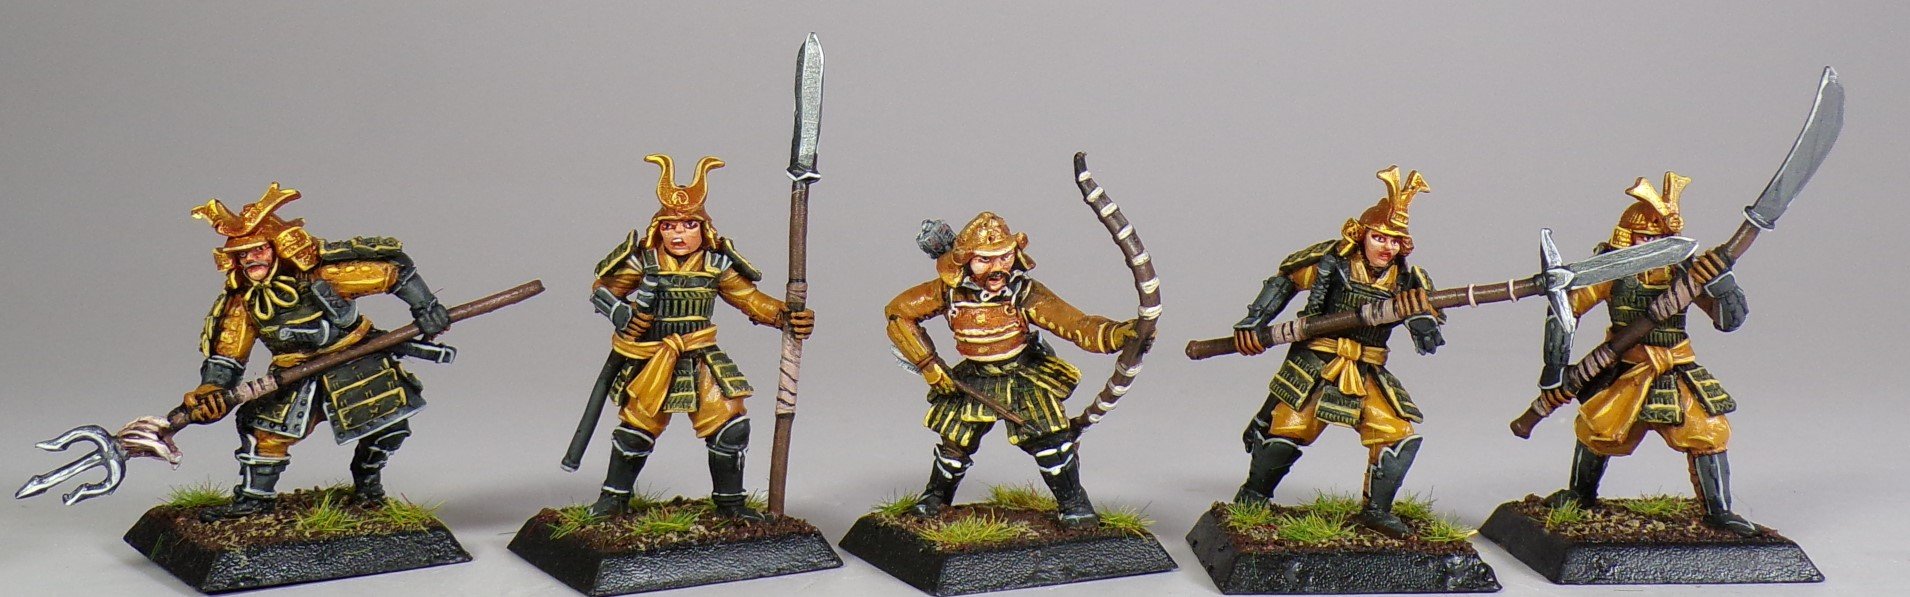 L5R Legend of the Five Rings Miniature Painting Service Paintedfigs (21).jpg